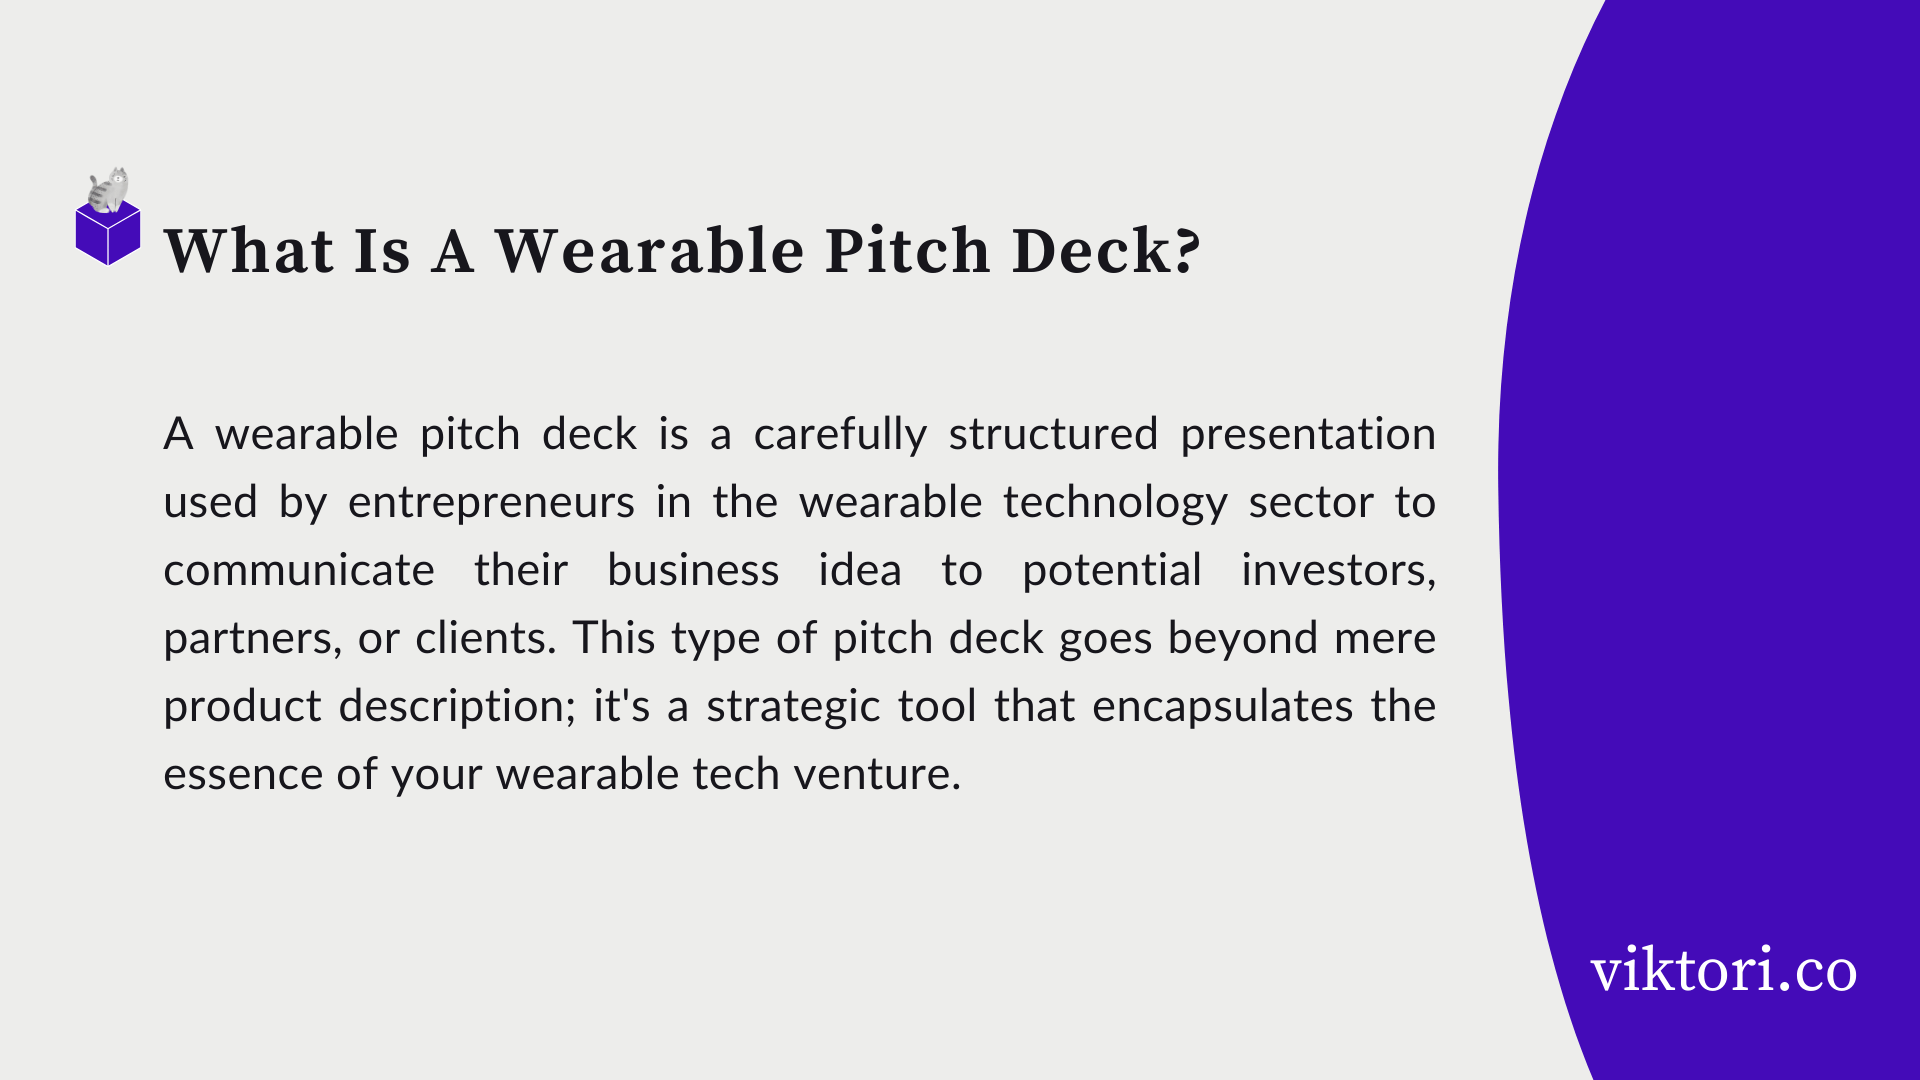 wearable pitch deck guide: definition